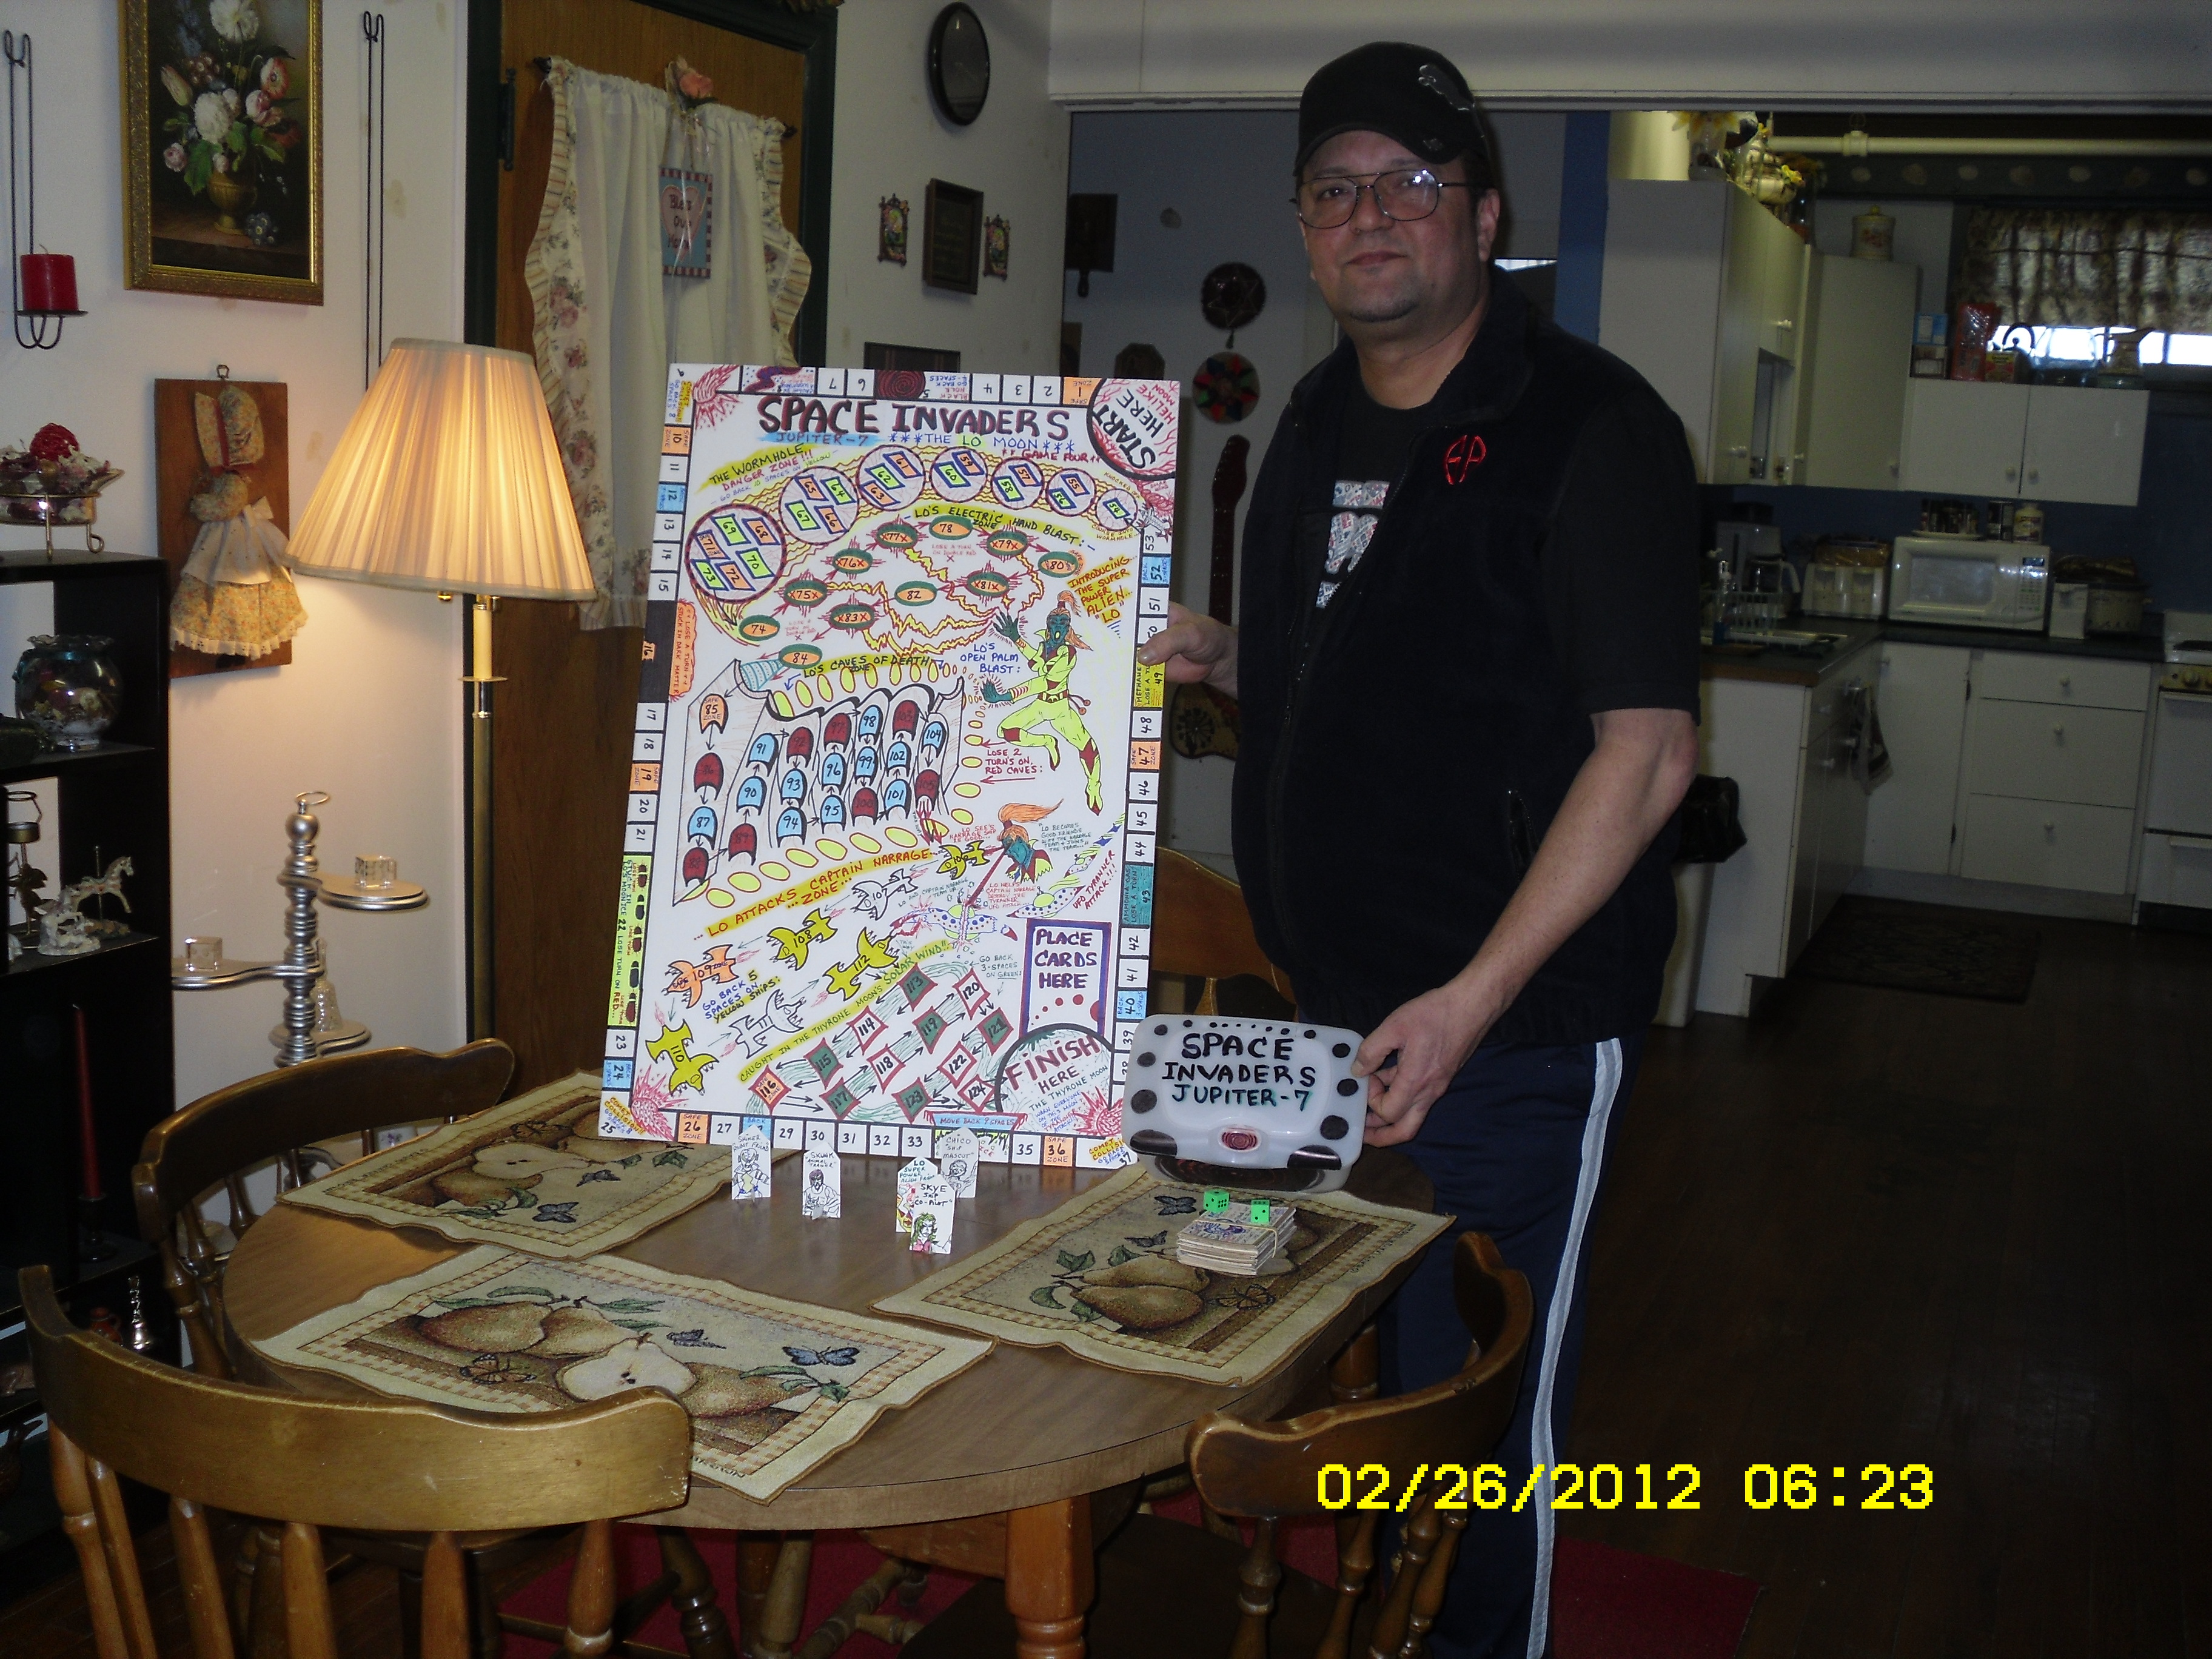 Me standing next to one of my completed board games...